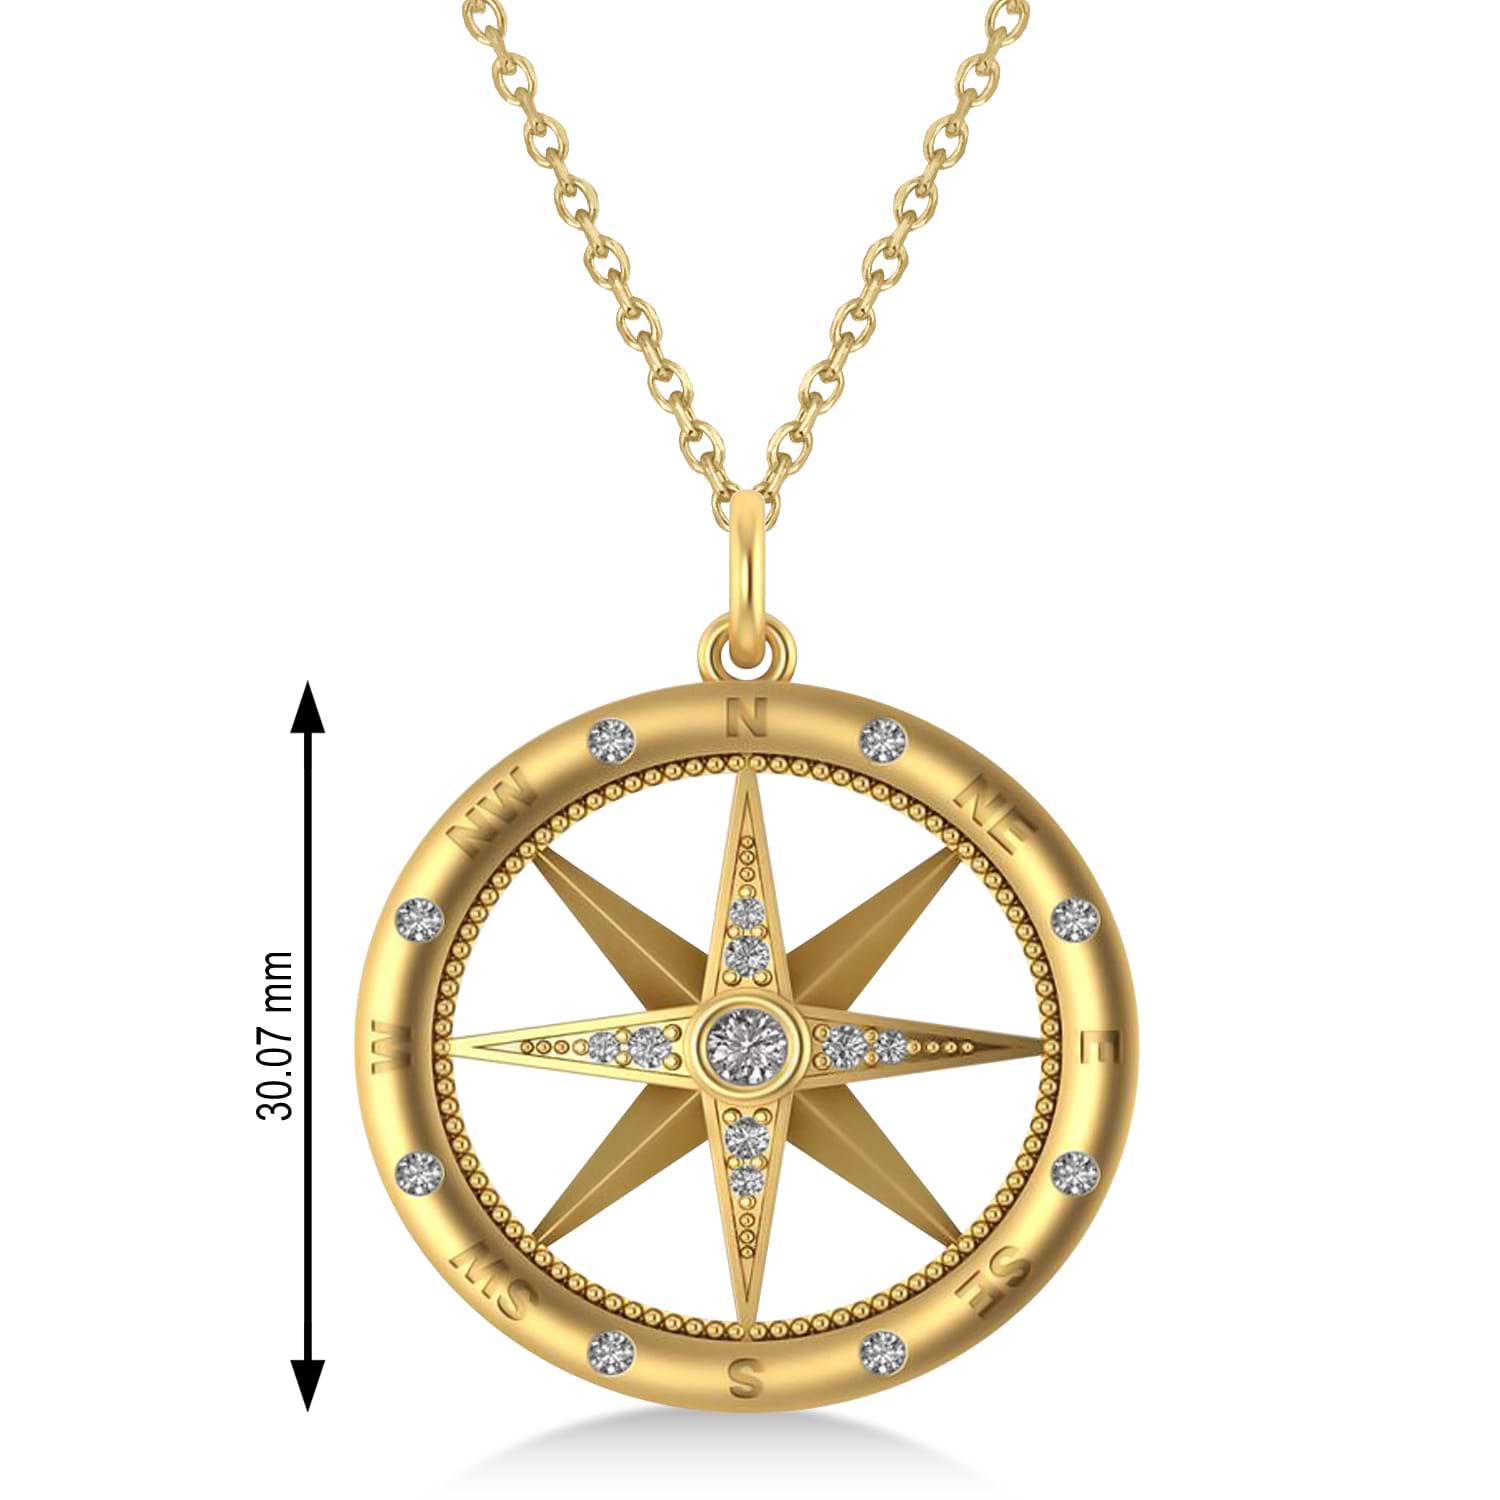 Real 925 Silver / 14k Gold Plated North Star Compass Medallion Pendant  Necklace | eBay